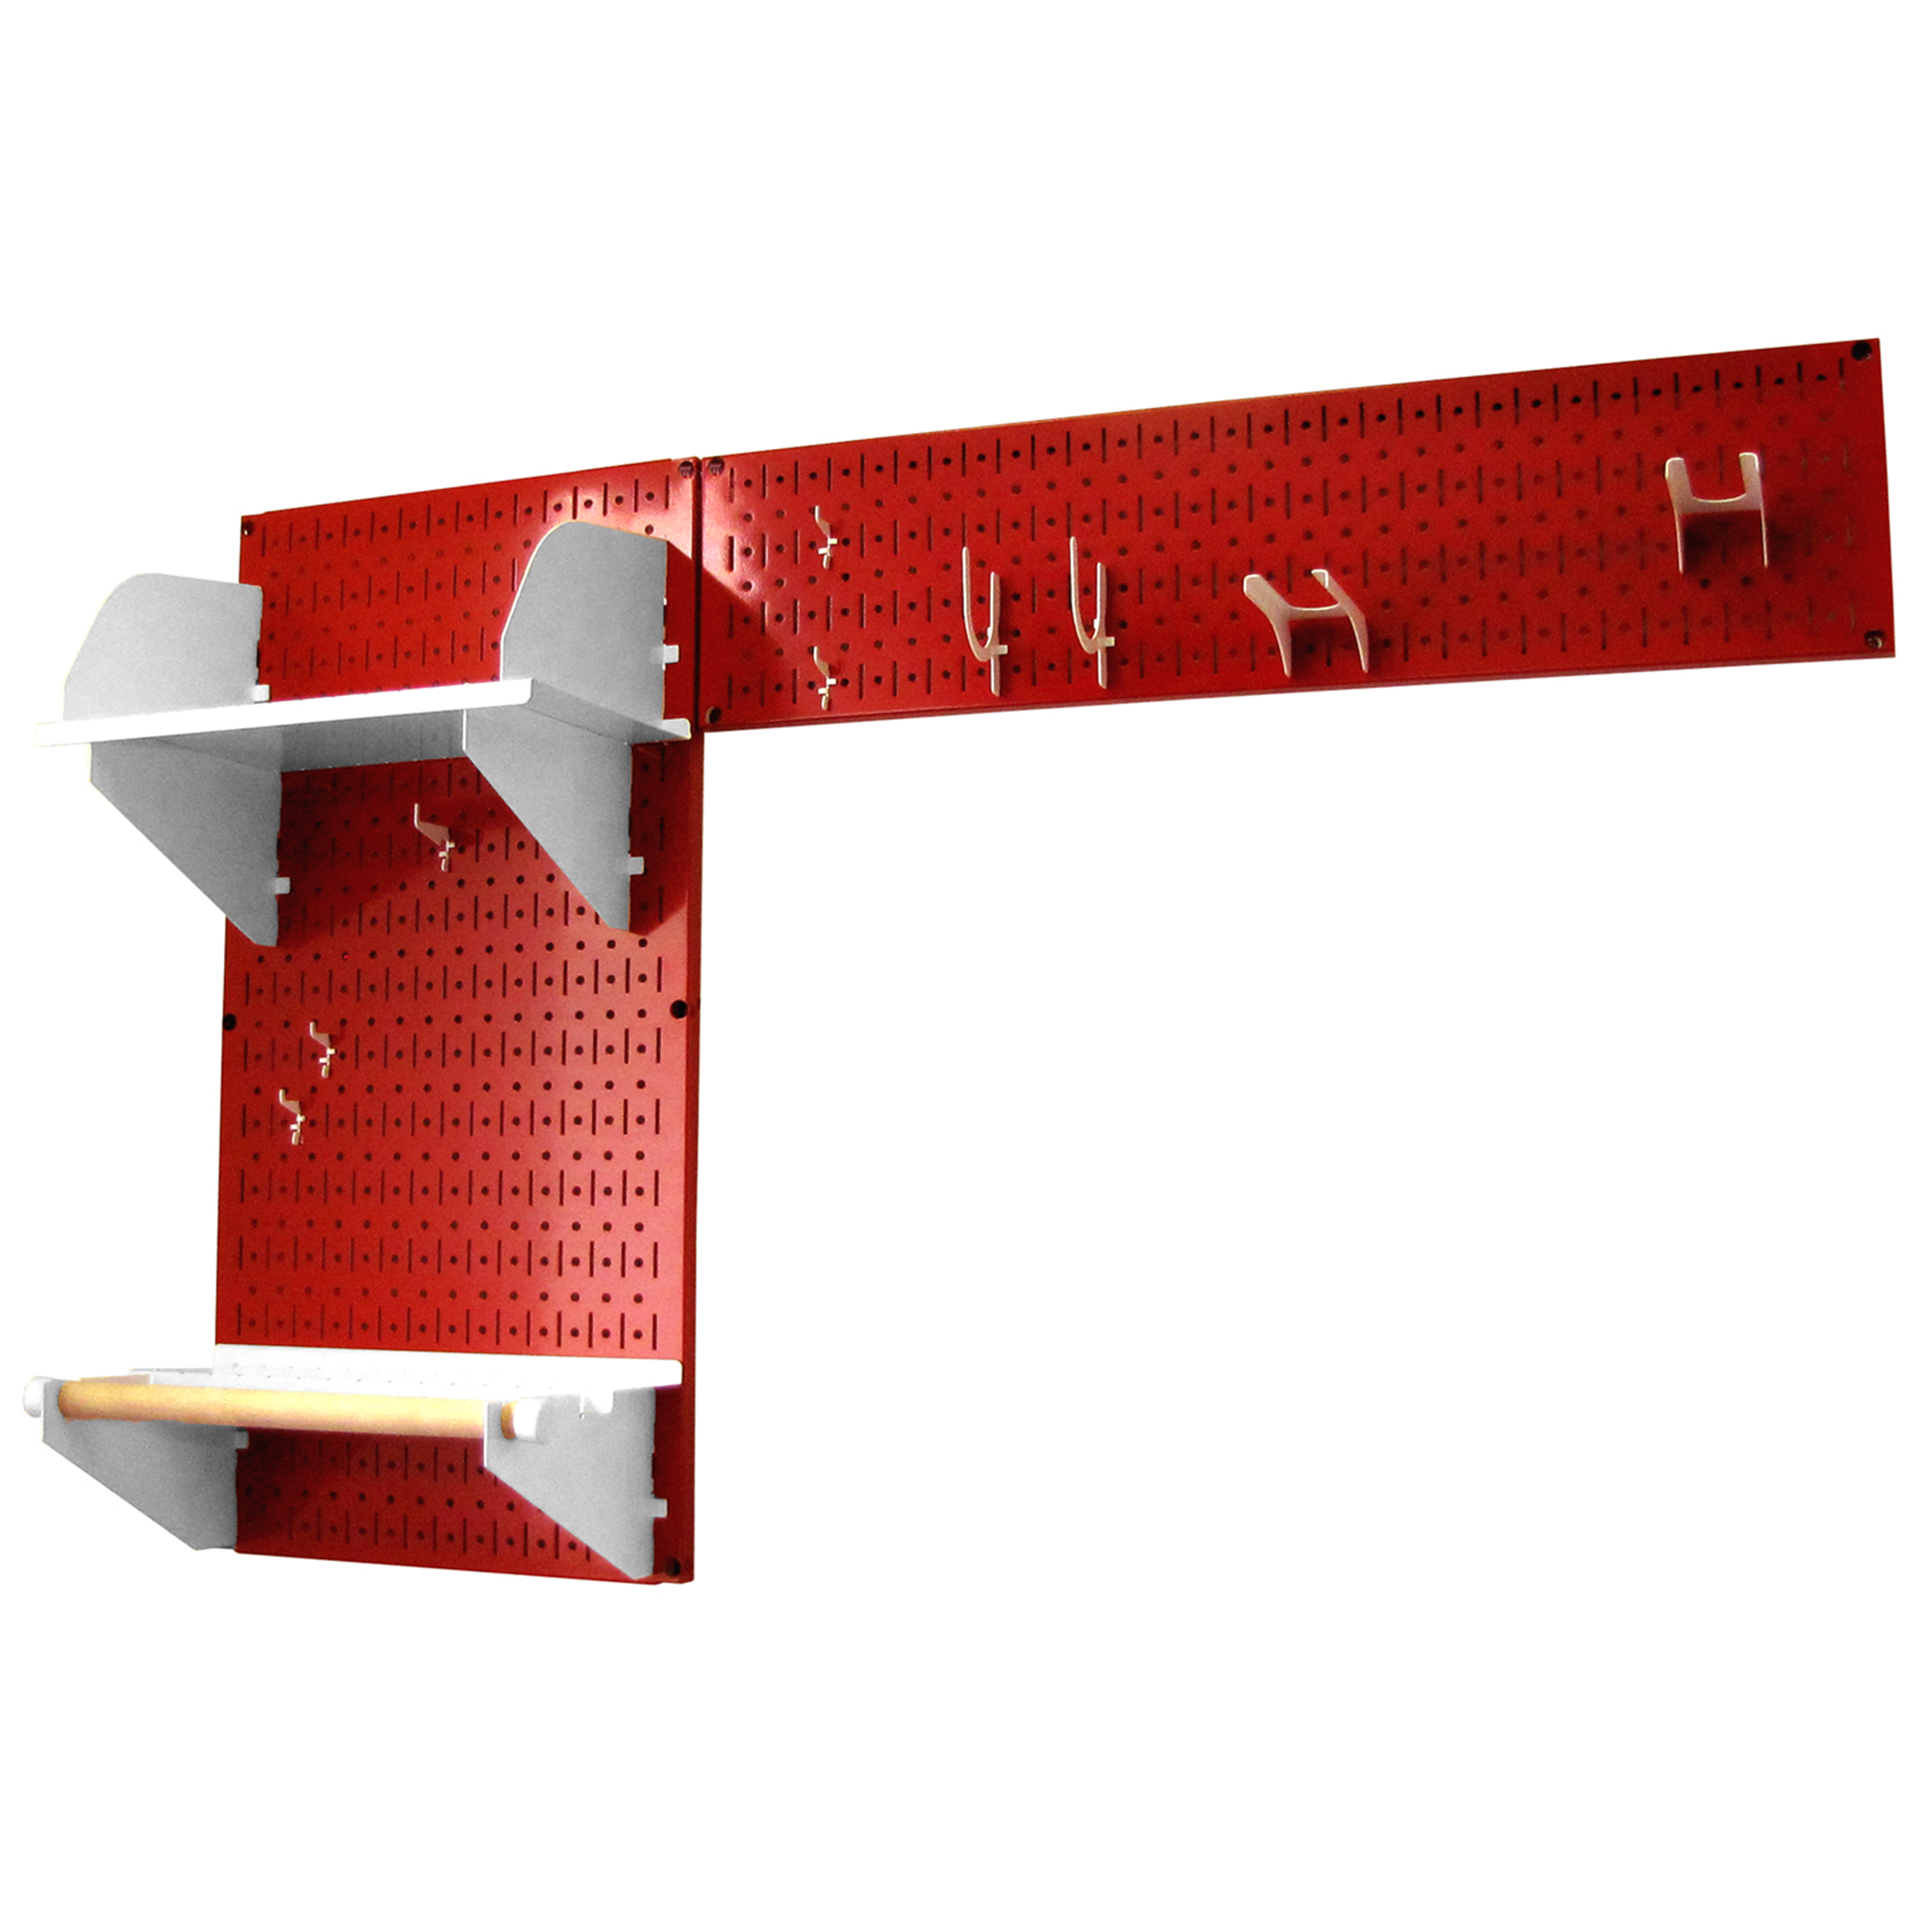 Pegboard Garden Tool Board Organizer With Red Pegboard And White Accessories